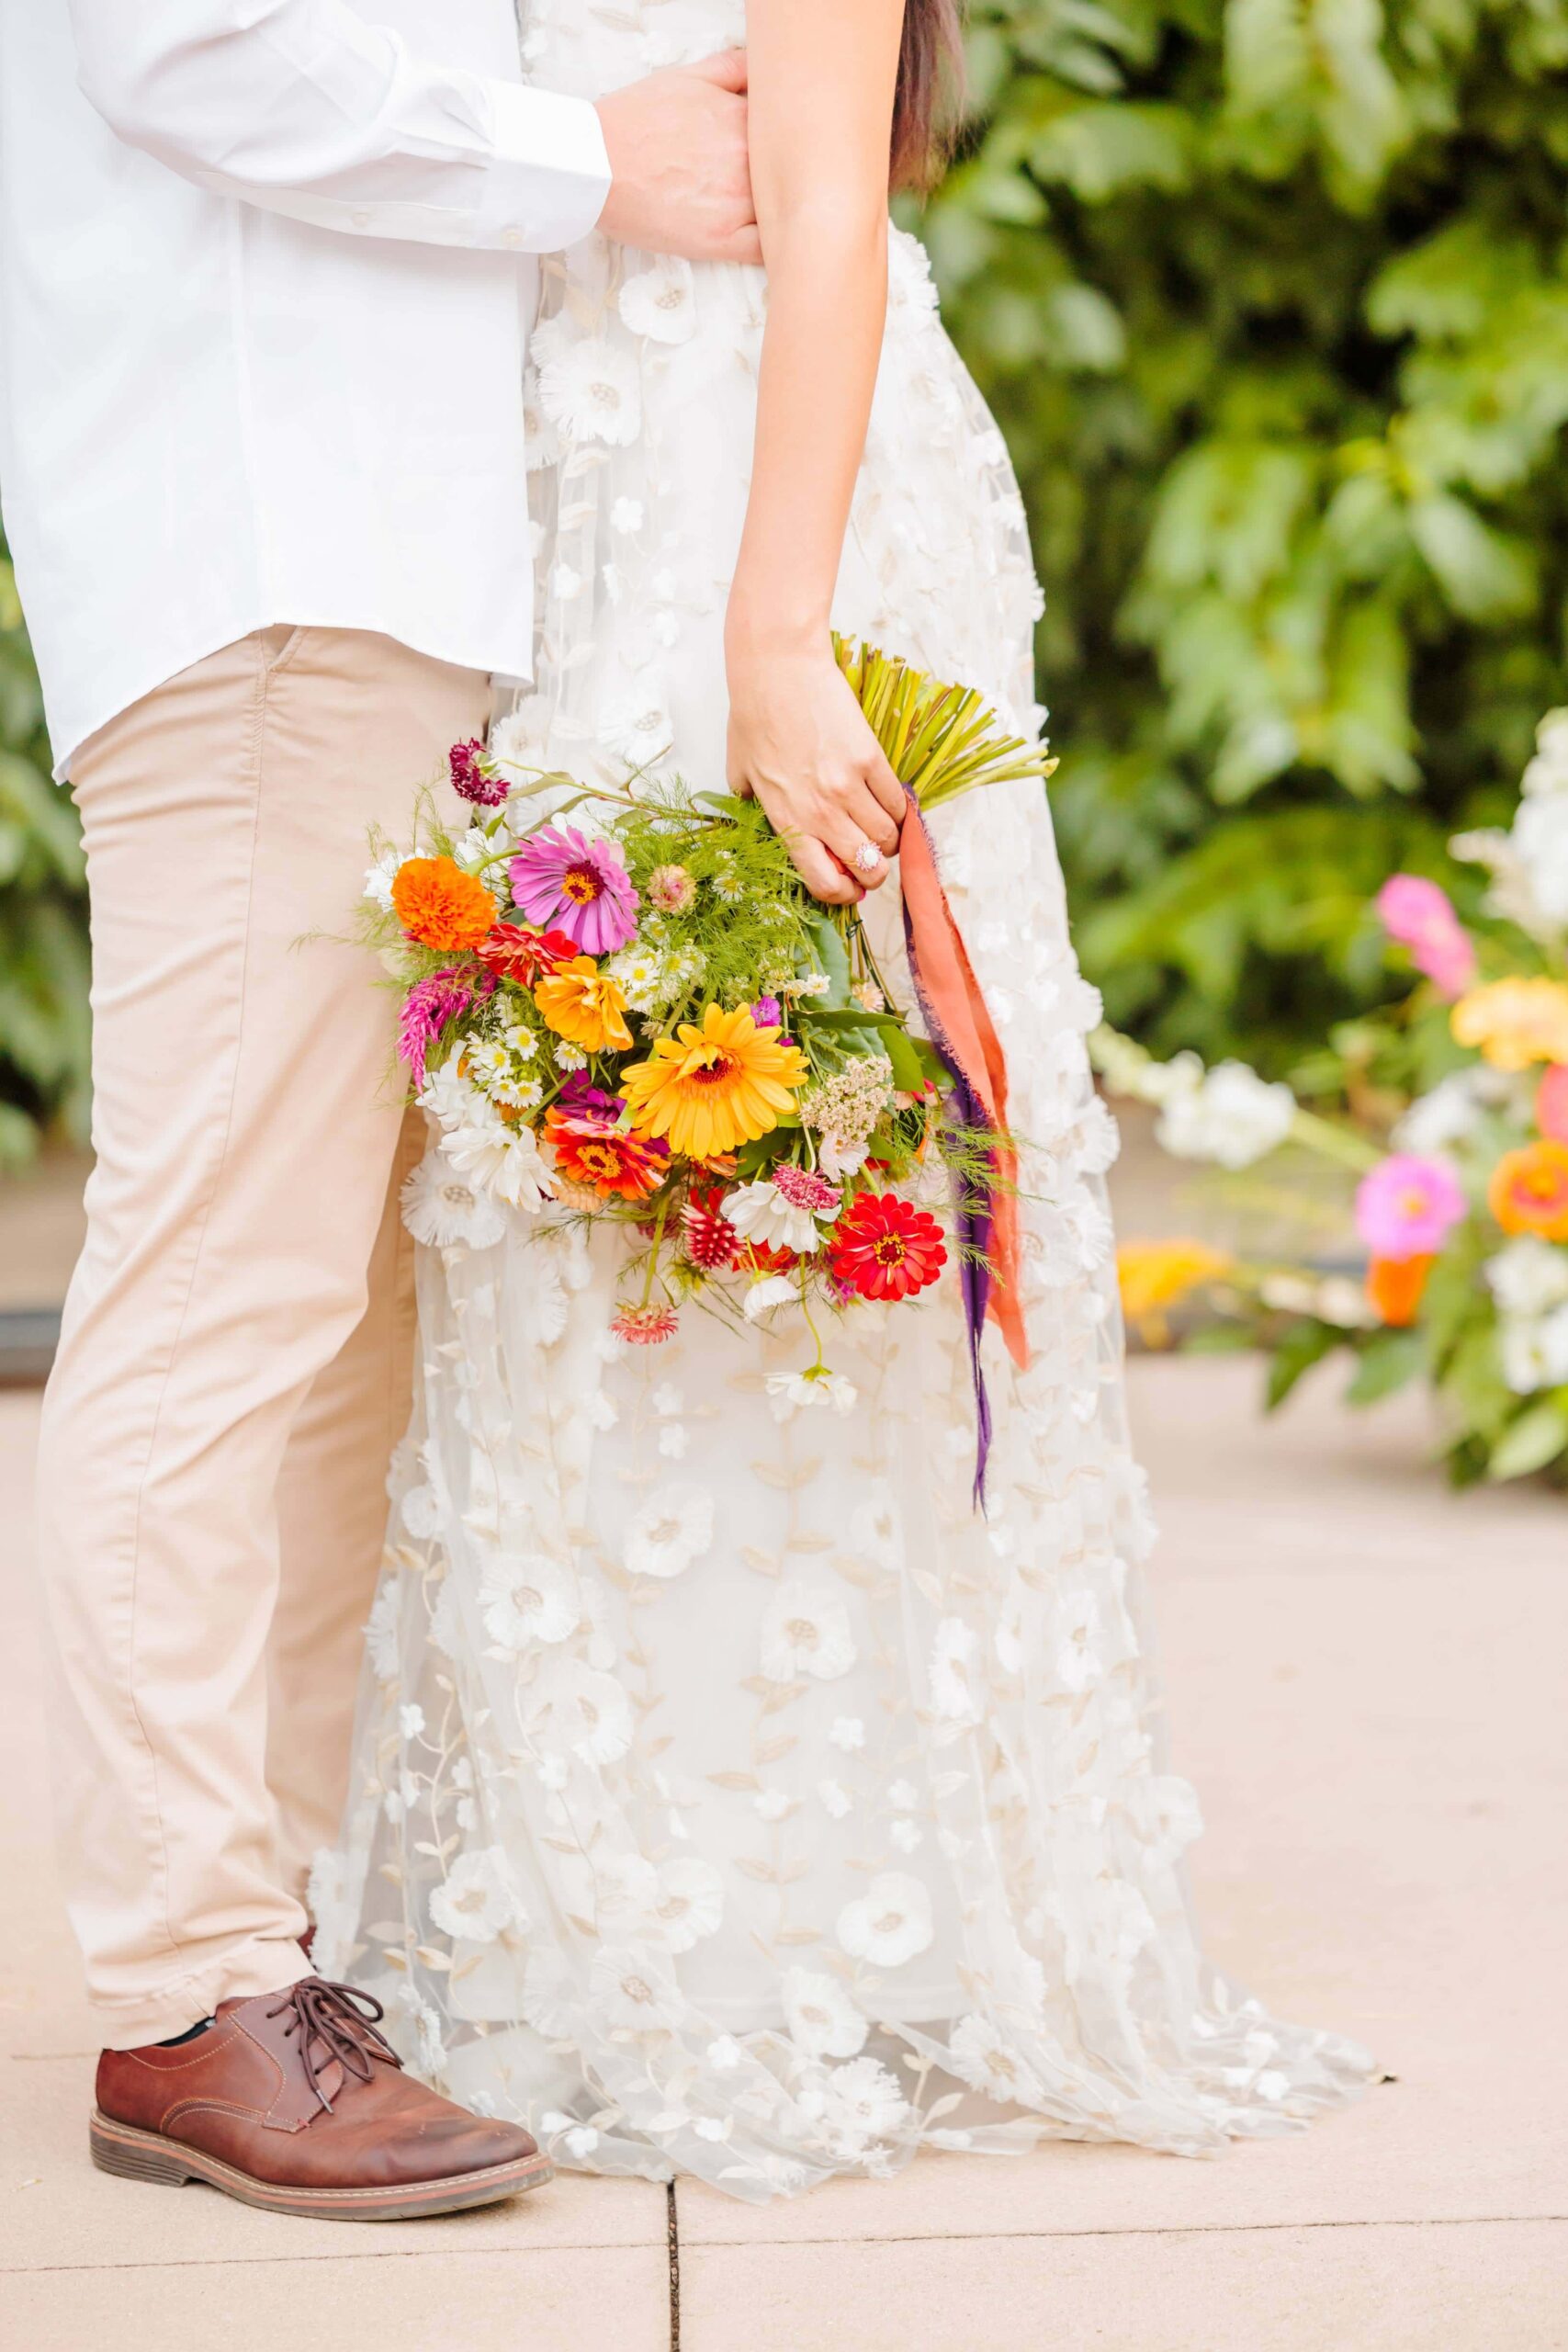 The bride holds her bouquet down by her side and you can see embroidered flowers on her disco wedding dress.